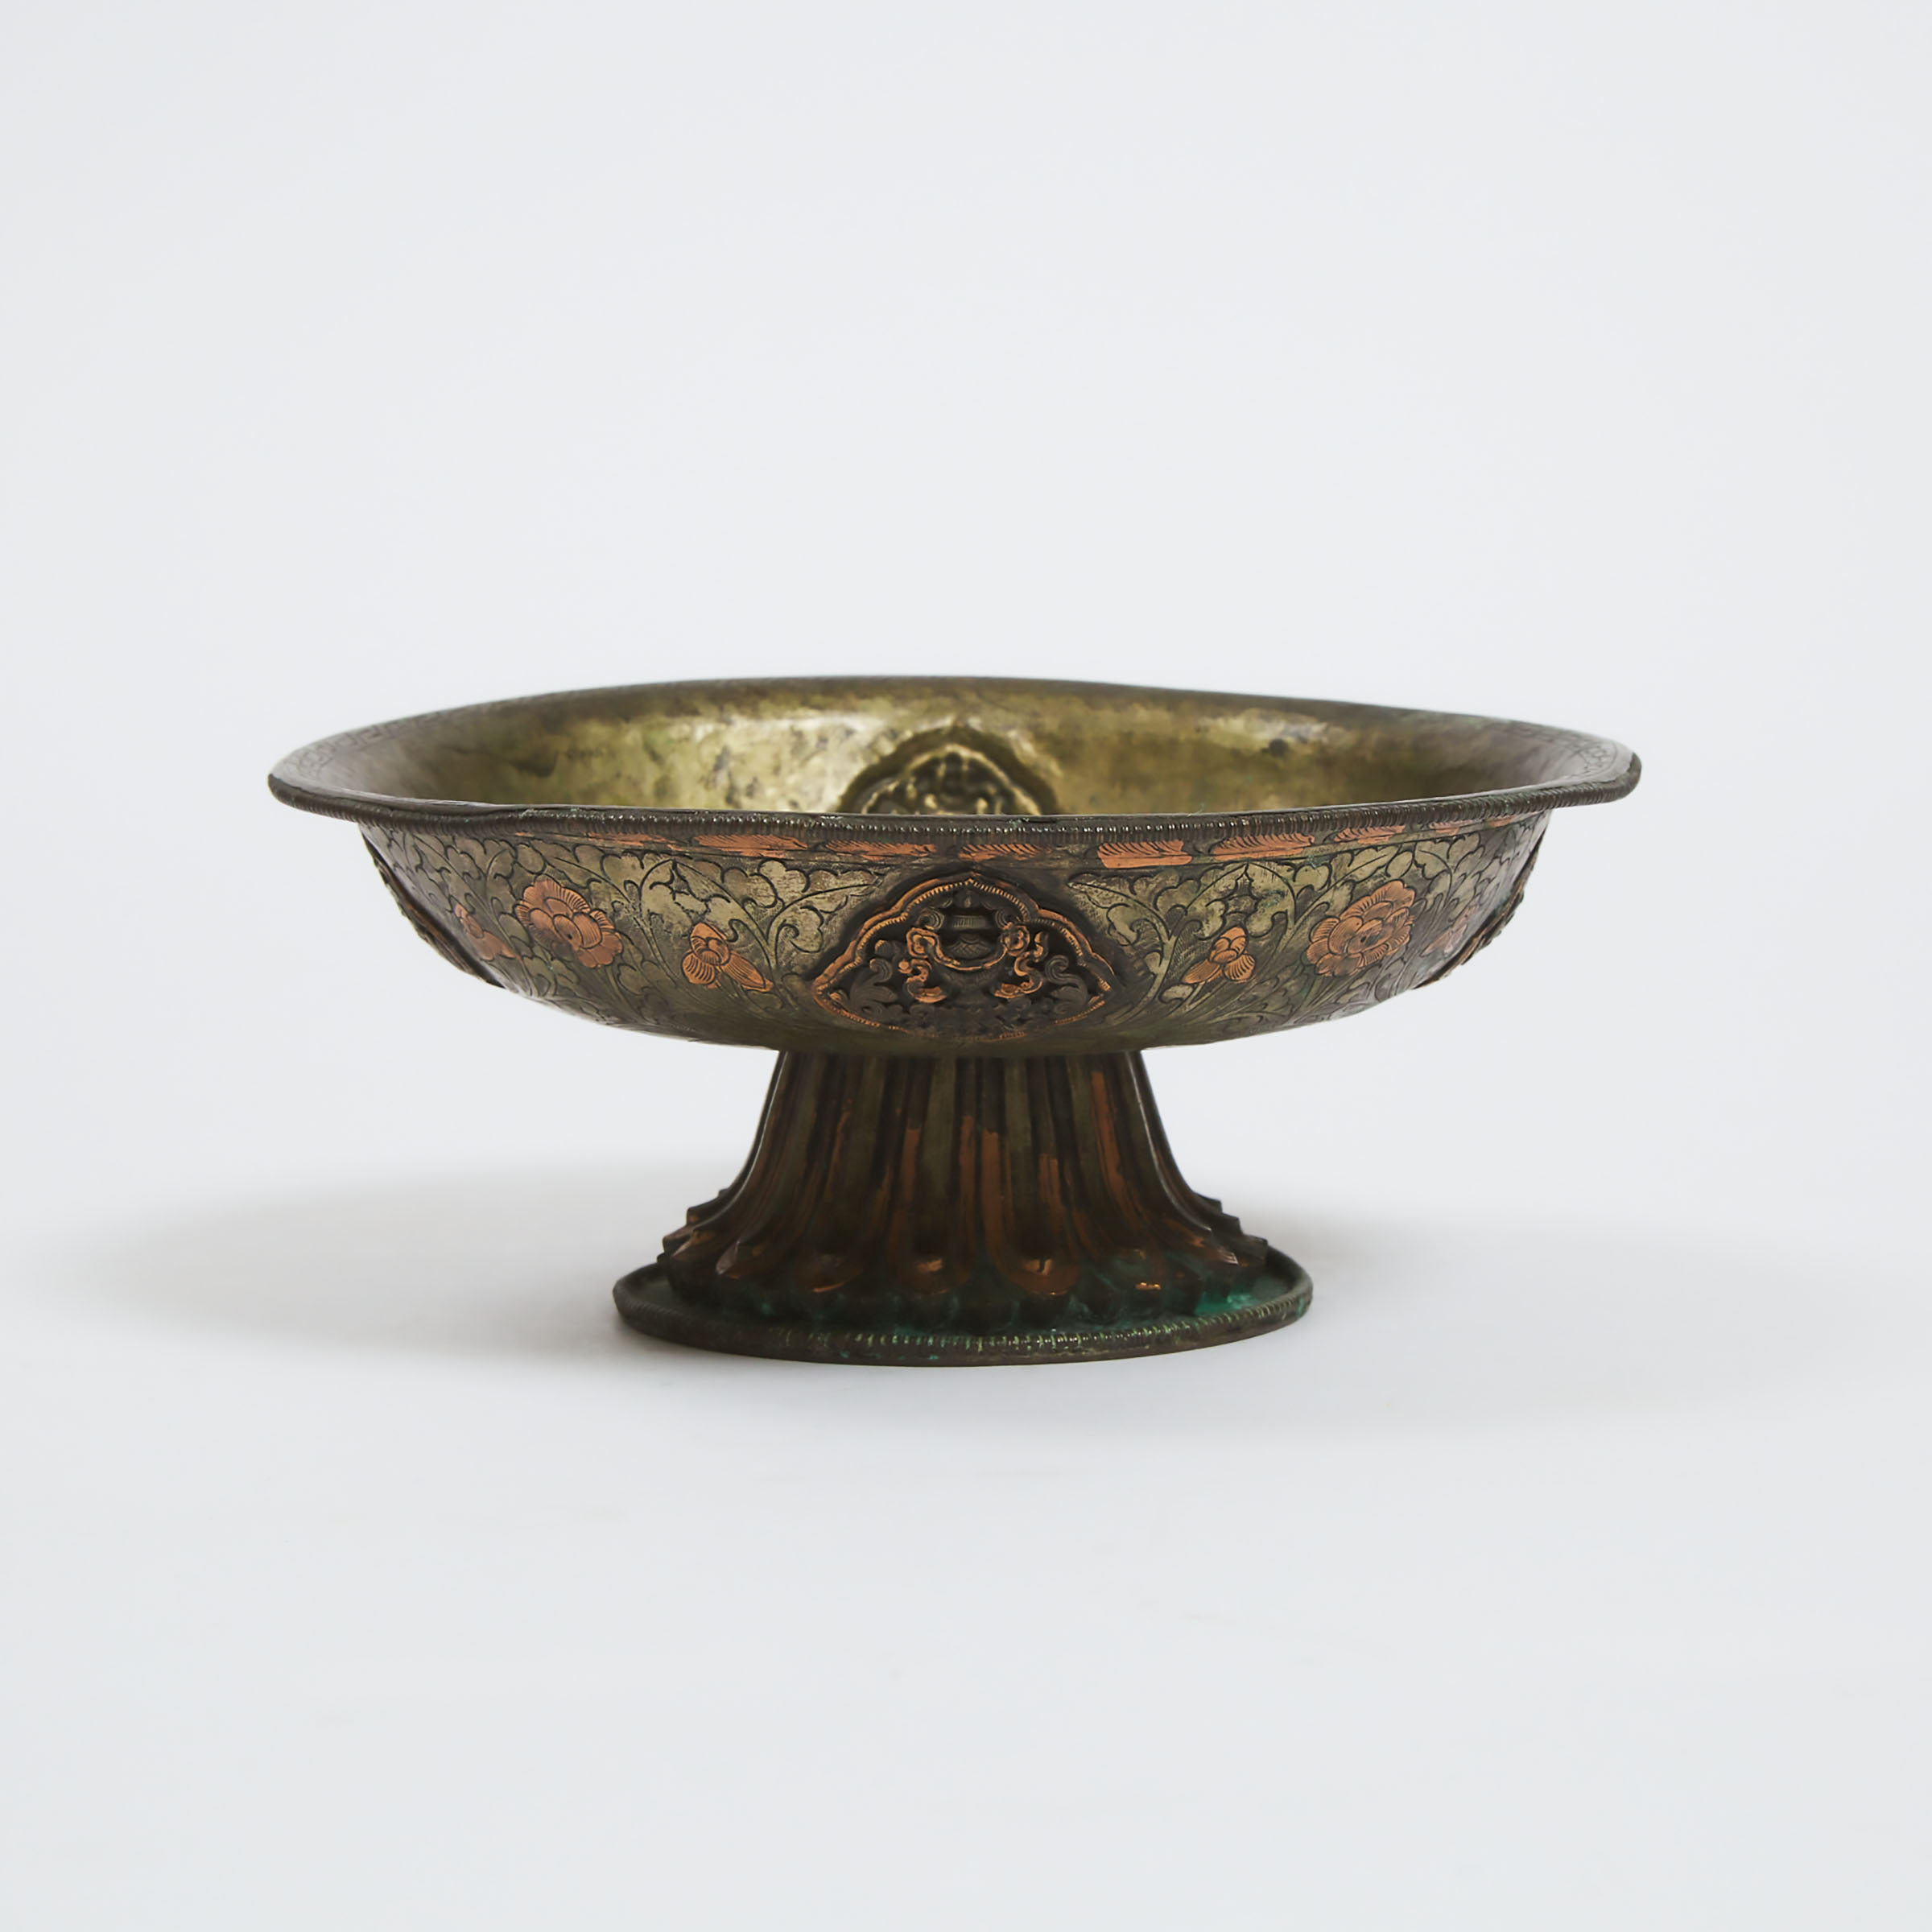 A Tibetan Copper Footed Dish, 11th Century or Later